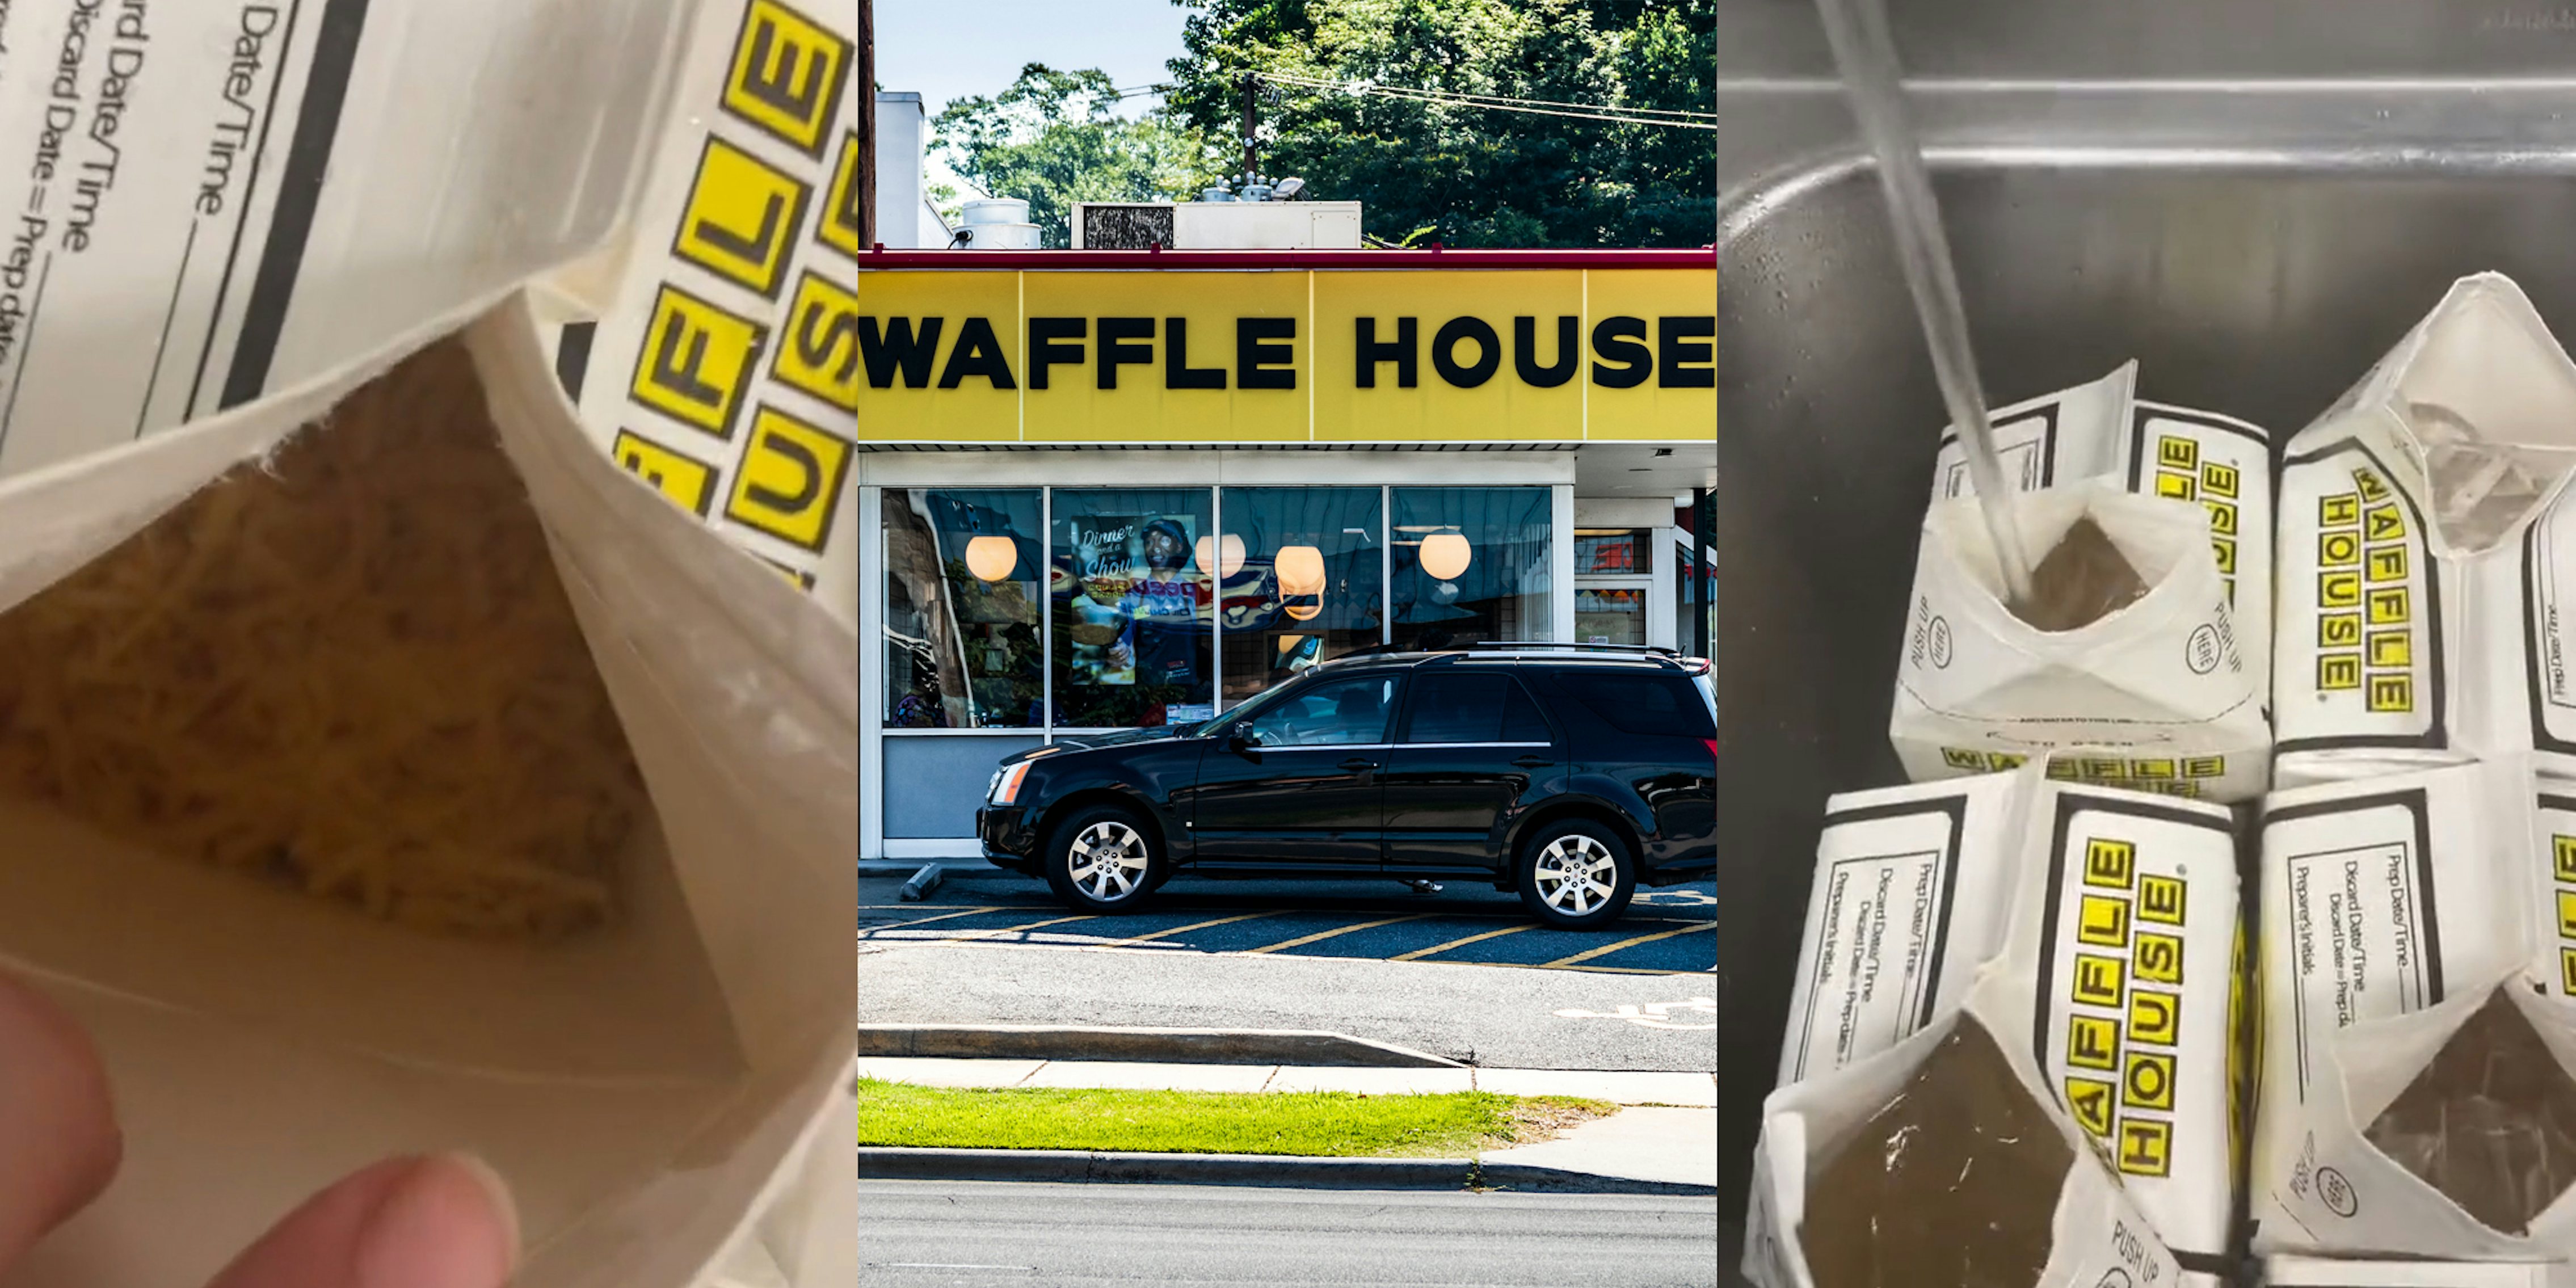 Waffle House carton with hash browns inside (l) Waffle House sign on building (c) Waffle House cartons in sink filling up with water (r)